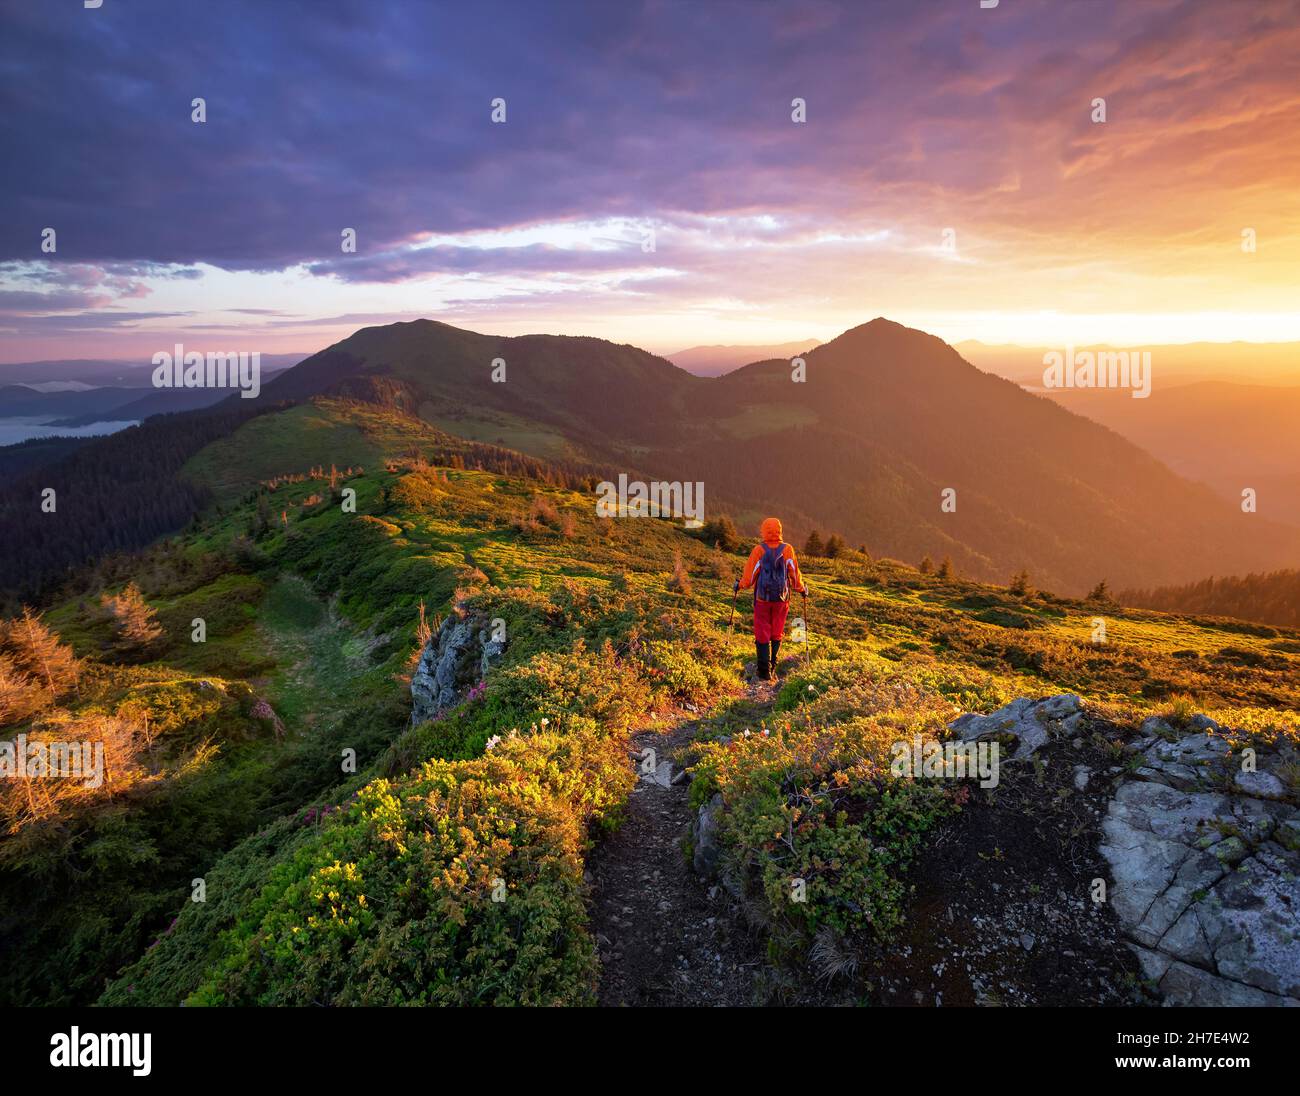 Beautiful sunrise on the autumn morning. Landscape with high mountains. Successful tourist is standing at the path in orange jacket. The lawn with ora Stock Photo